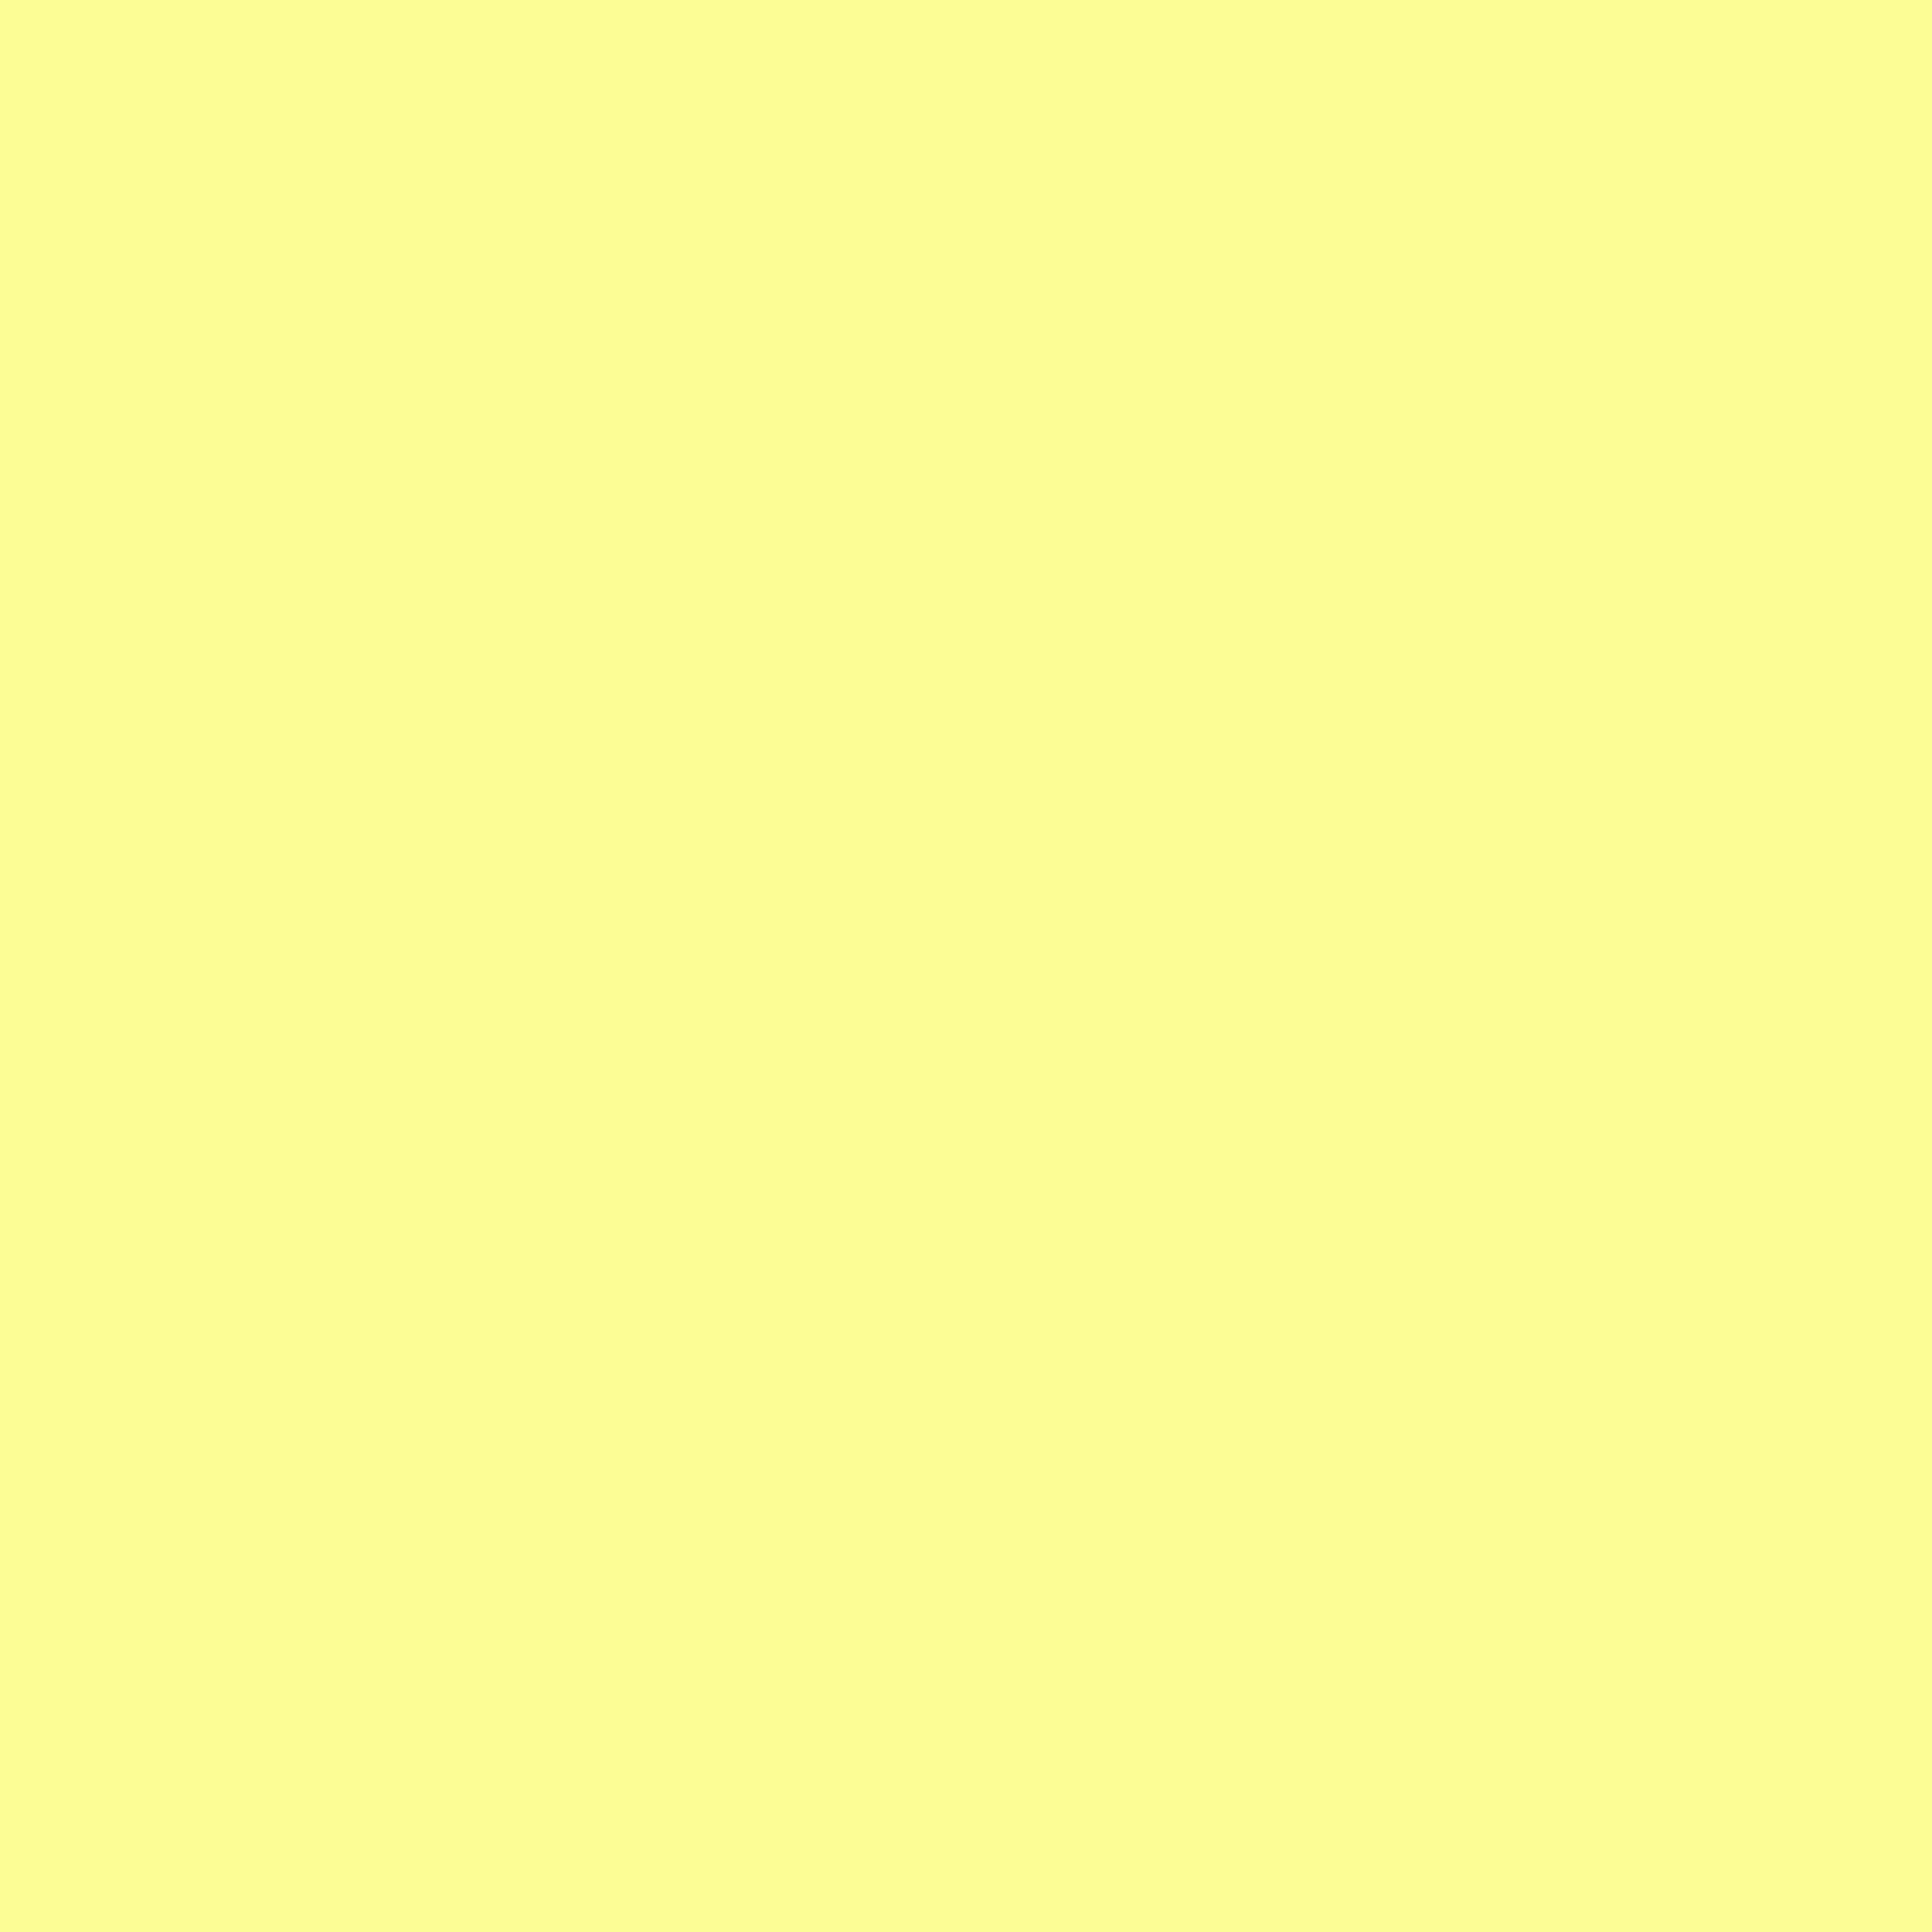 2732×2732-pastel-yellow-solid-color-background | PMO Advisory